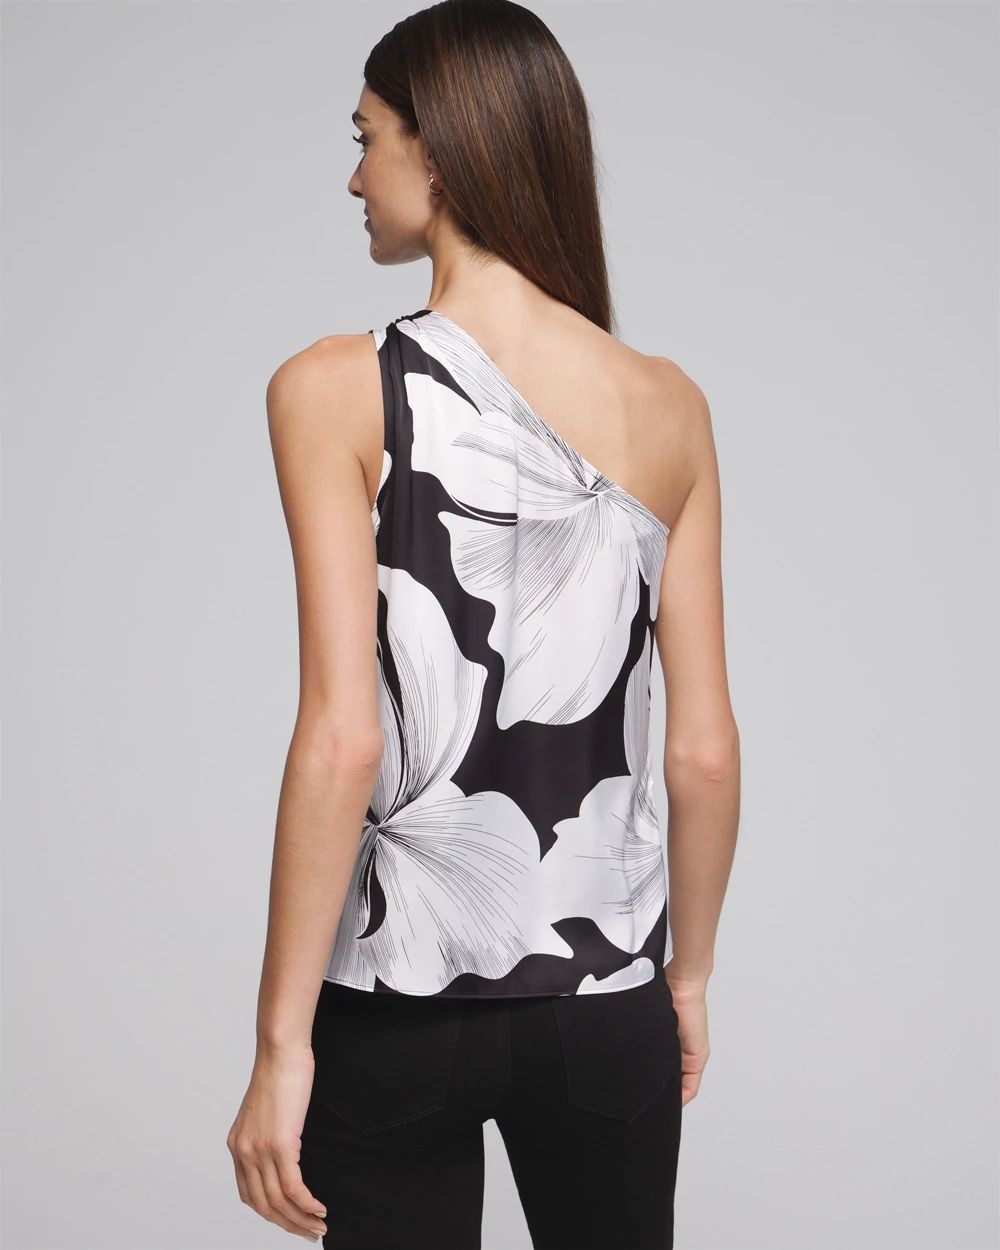 Outlet WHBM One-Shoulder Satin Top